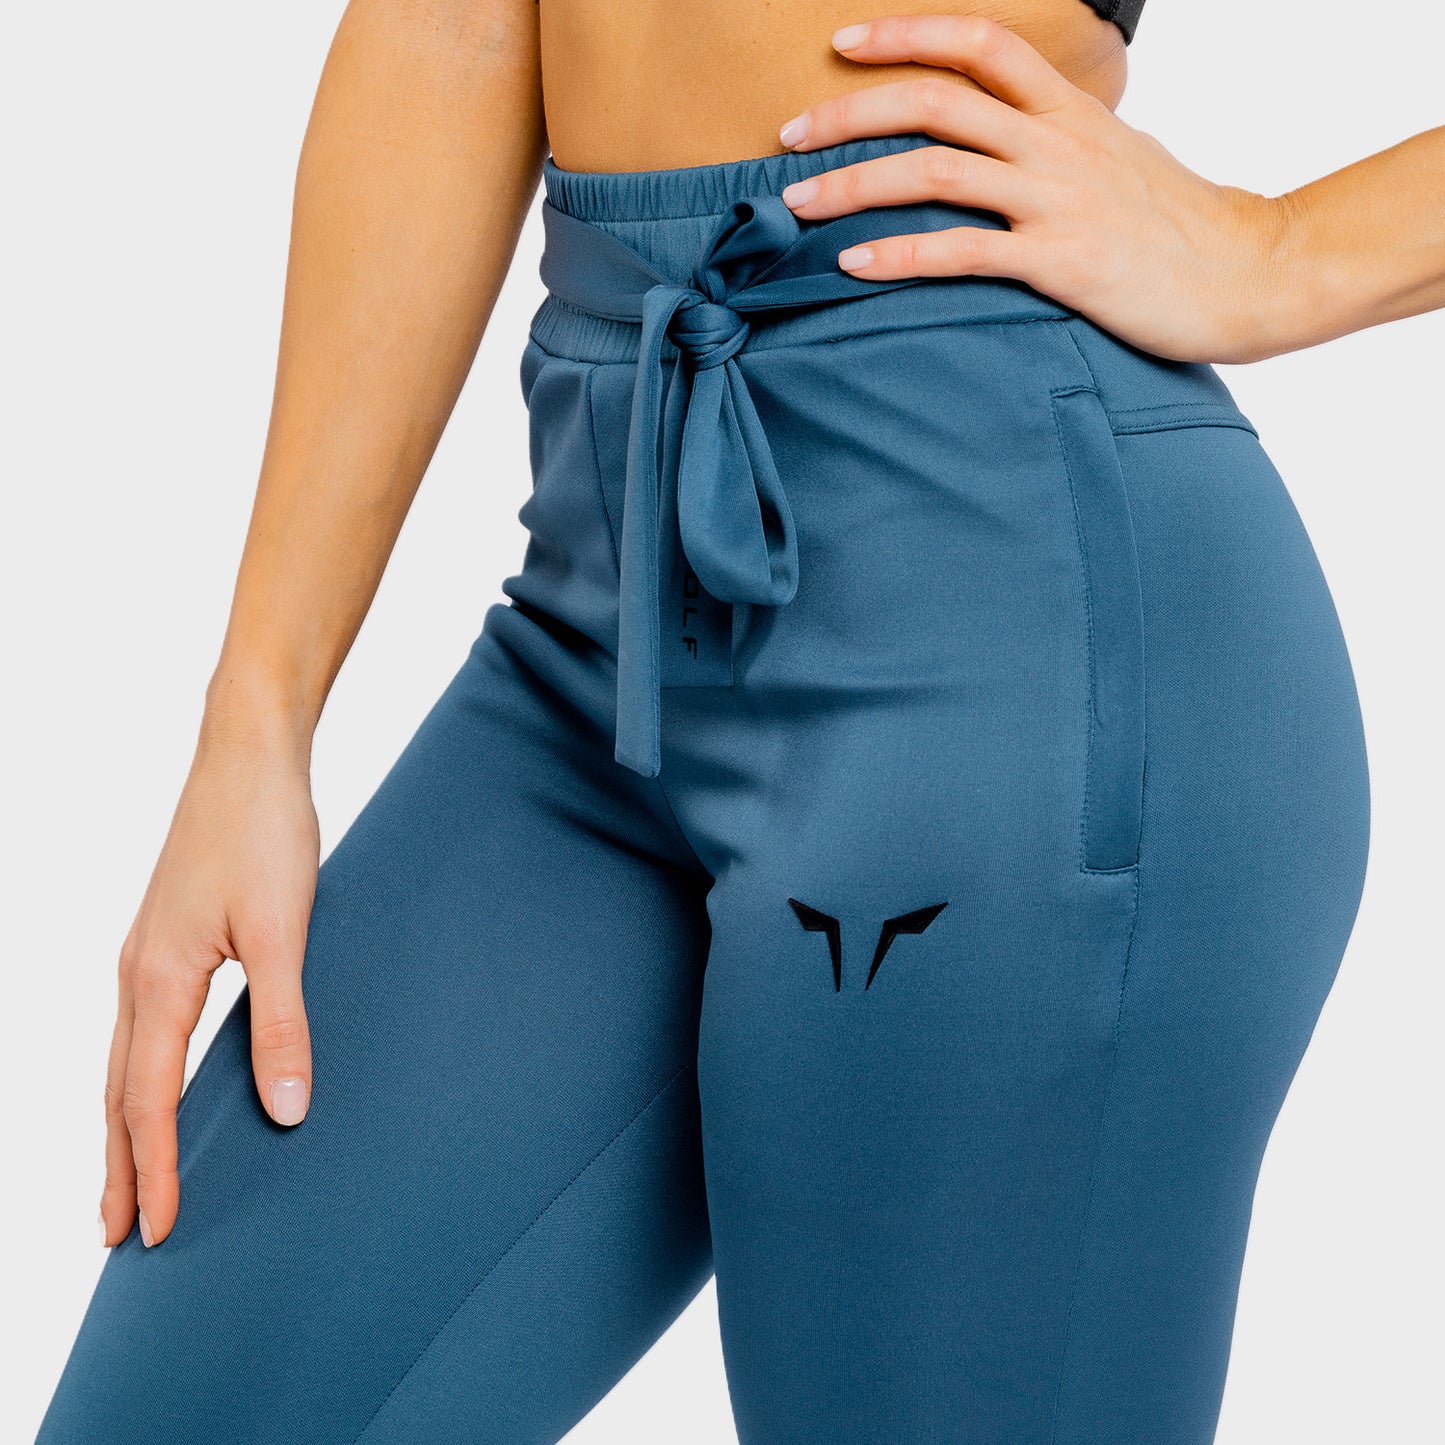 AE, She-Wolf Do-Knot-Joggers - Teal, Workout Pants Women